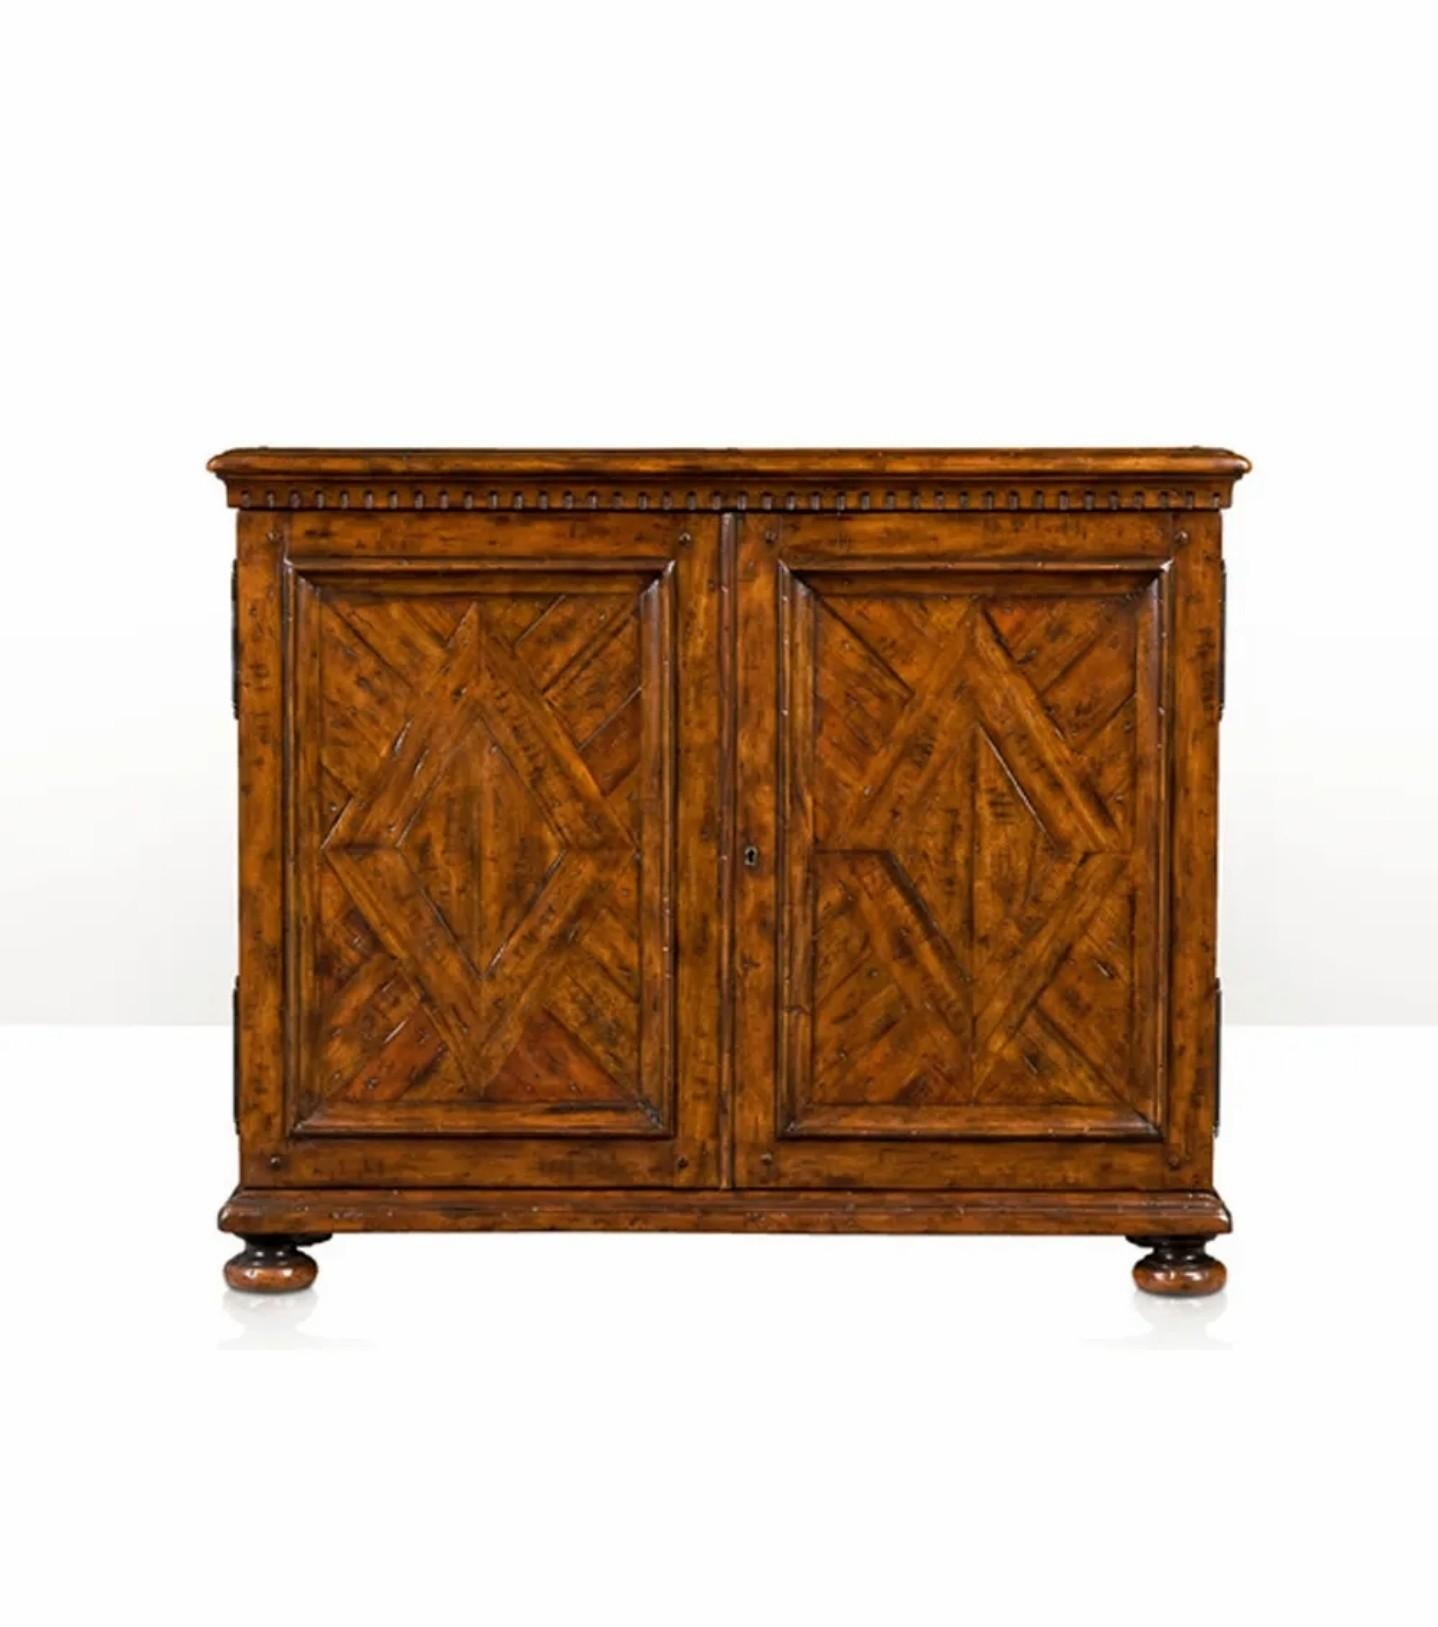 Theodore Alexander Sir John's Castle Bromwich Antique Mahogany Parquetry Cabinet 9